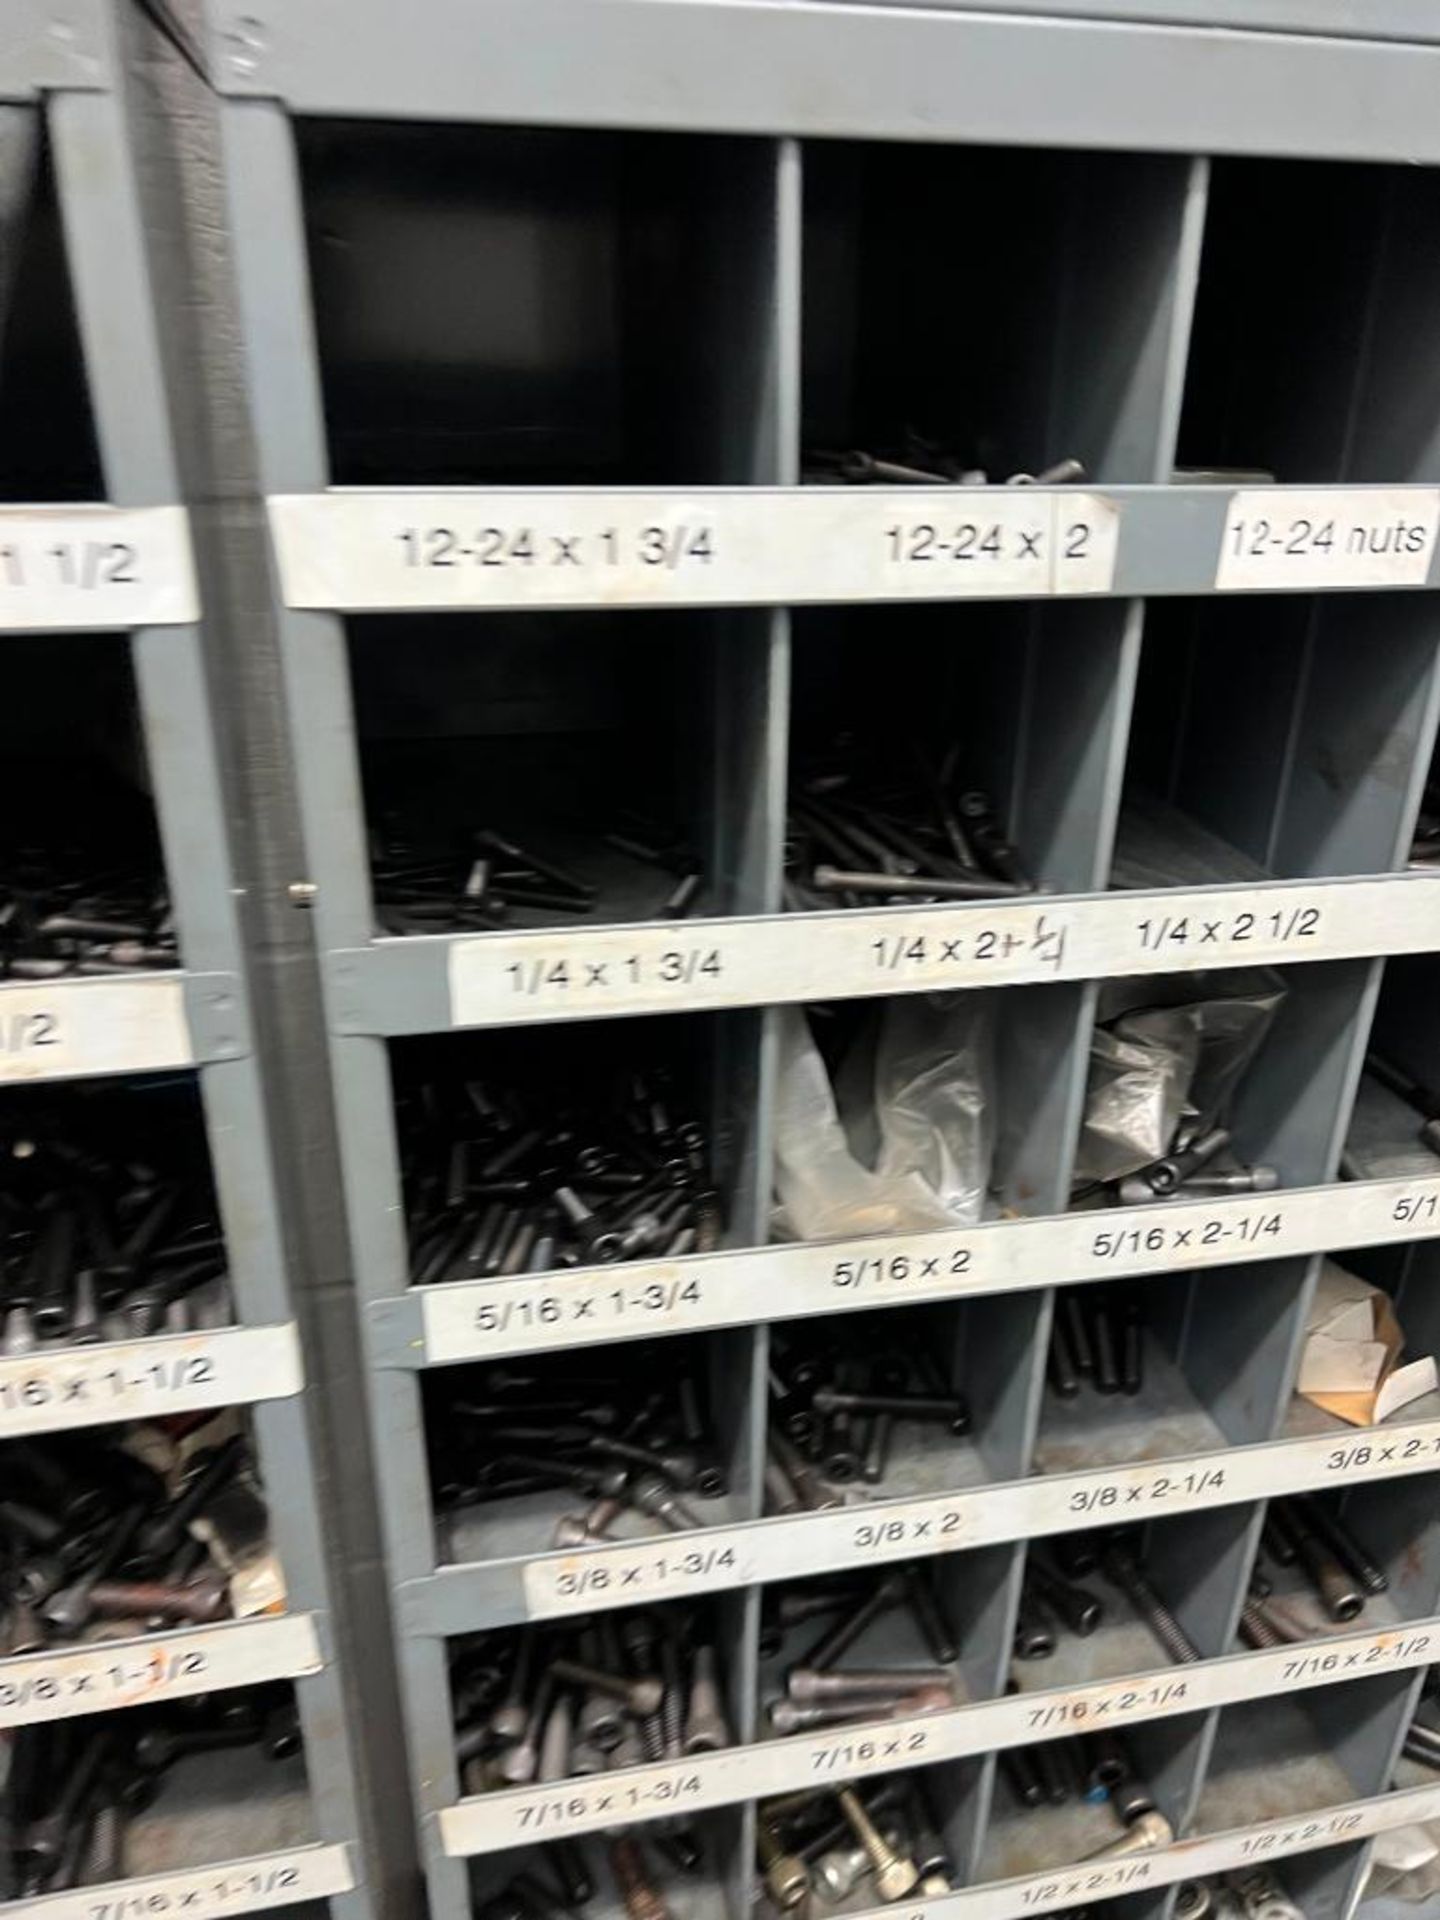 (28) Shelves of Assorted Parts, VERY LARGE LOT Consisting of MRO, Drives, Valves, PLC, Nuts, Bolts, - Image 15 of 67